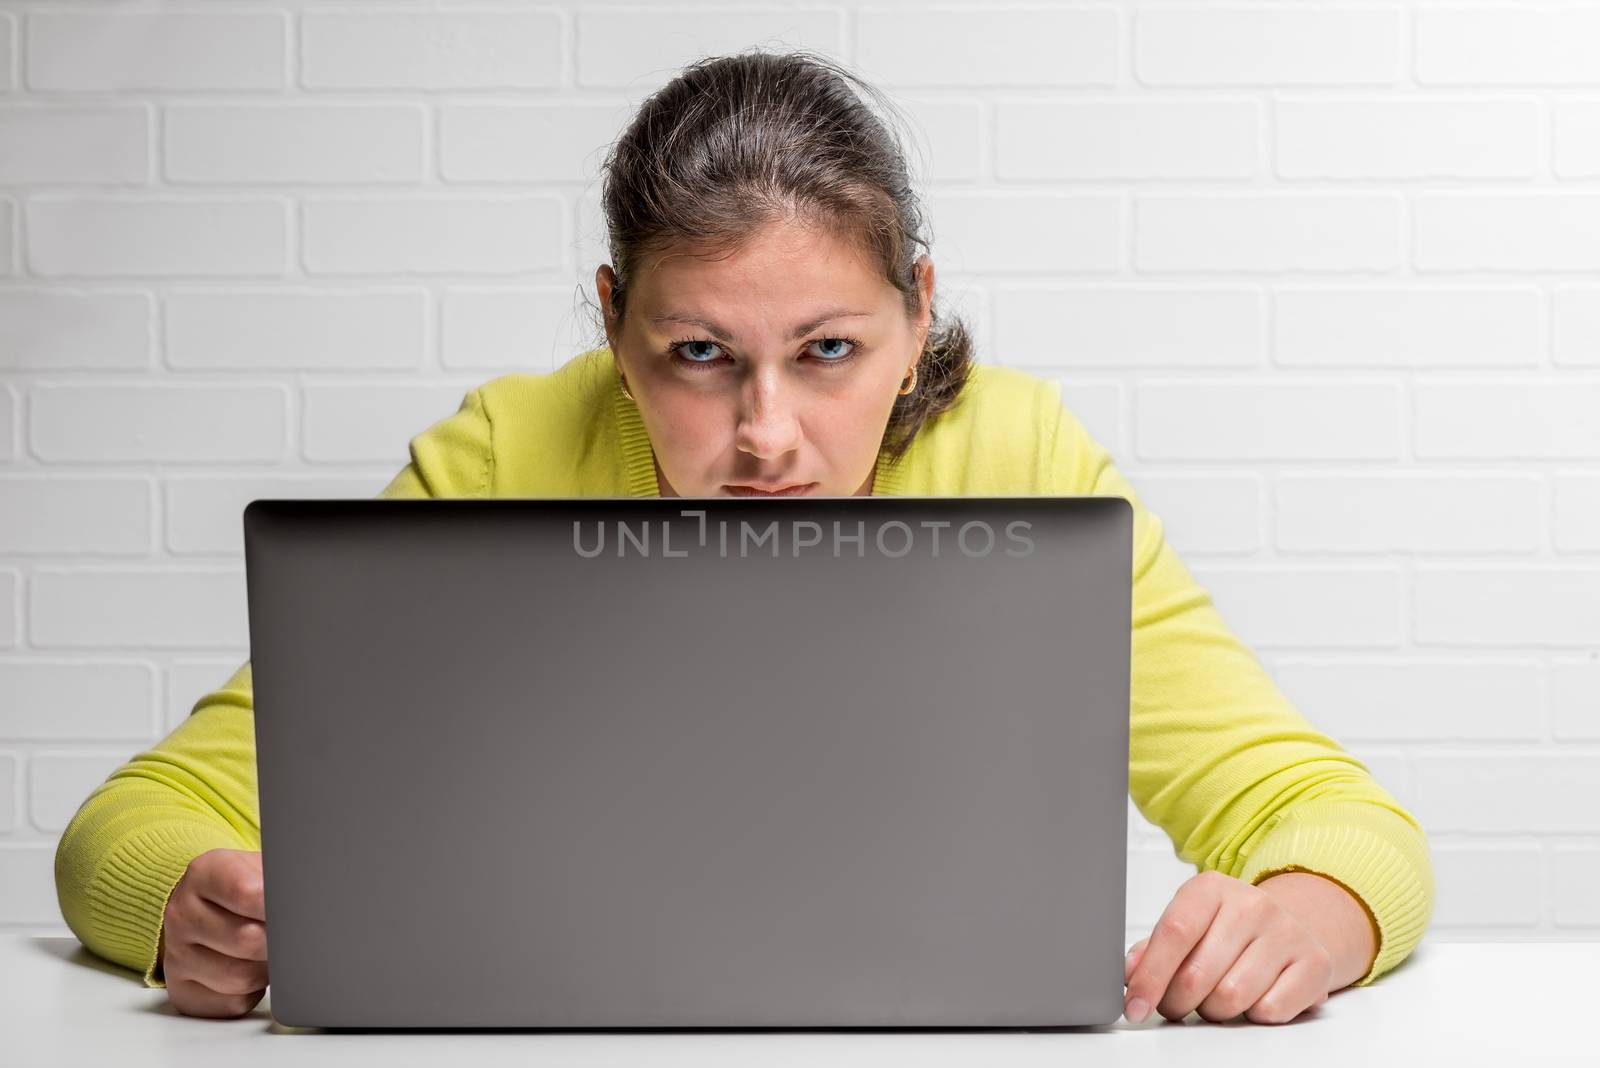 A woman hacker with a laptop steals data by kosmsos111